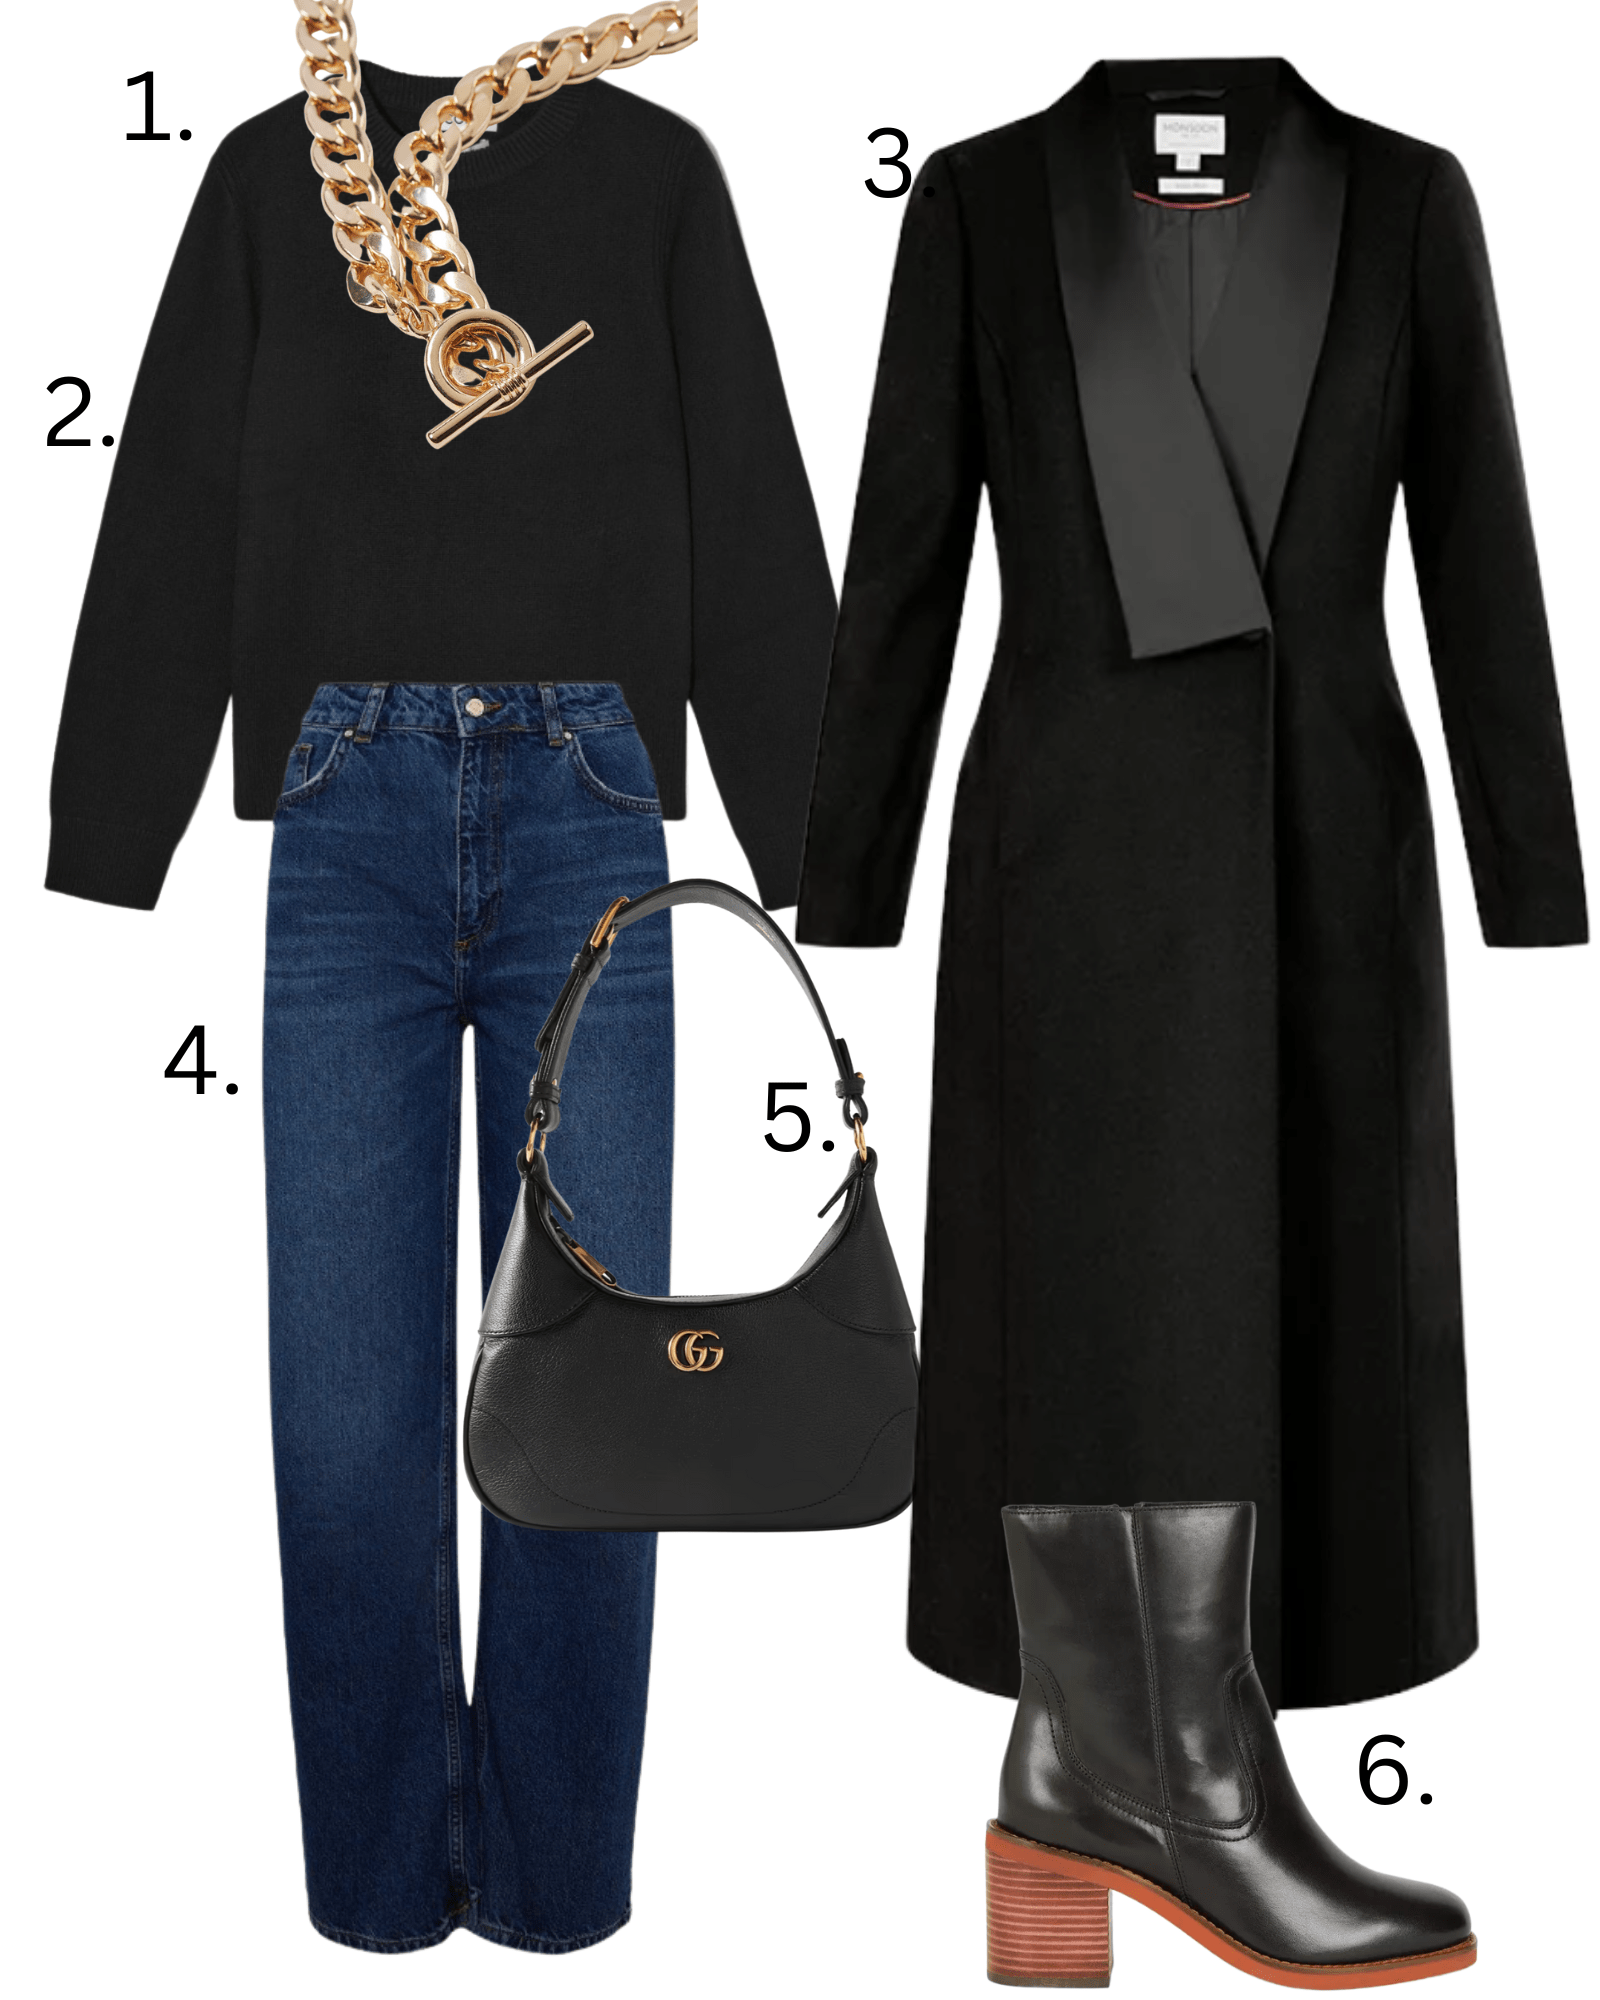 Six different jeans and how to style them